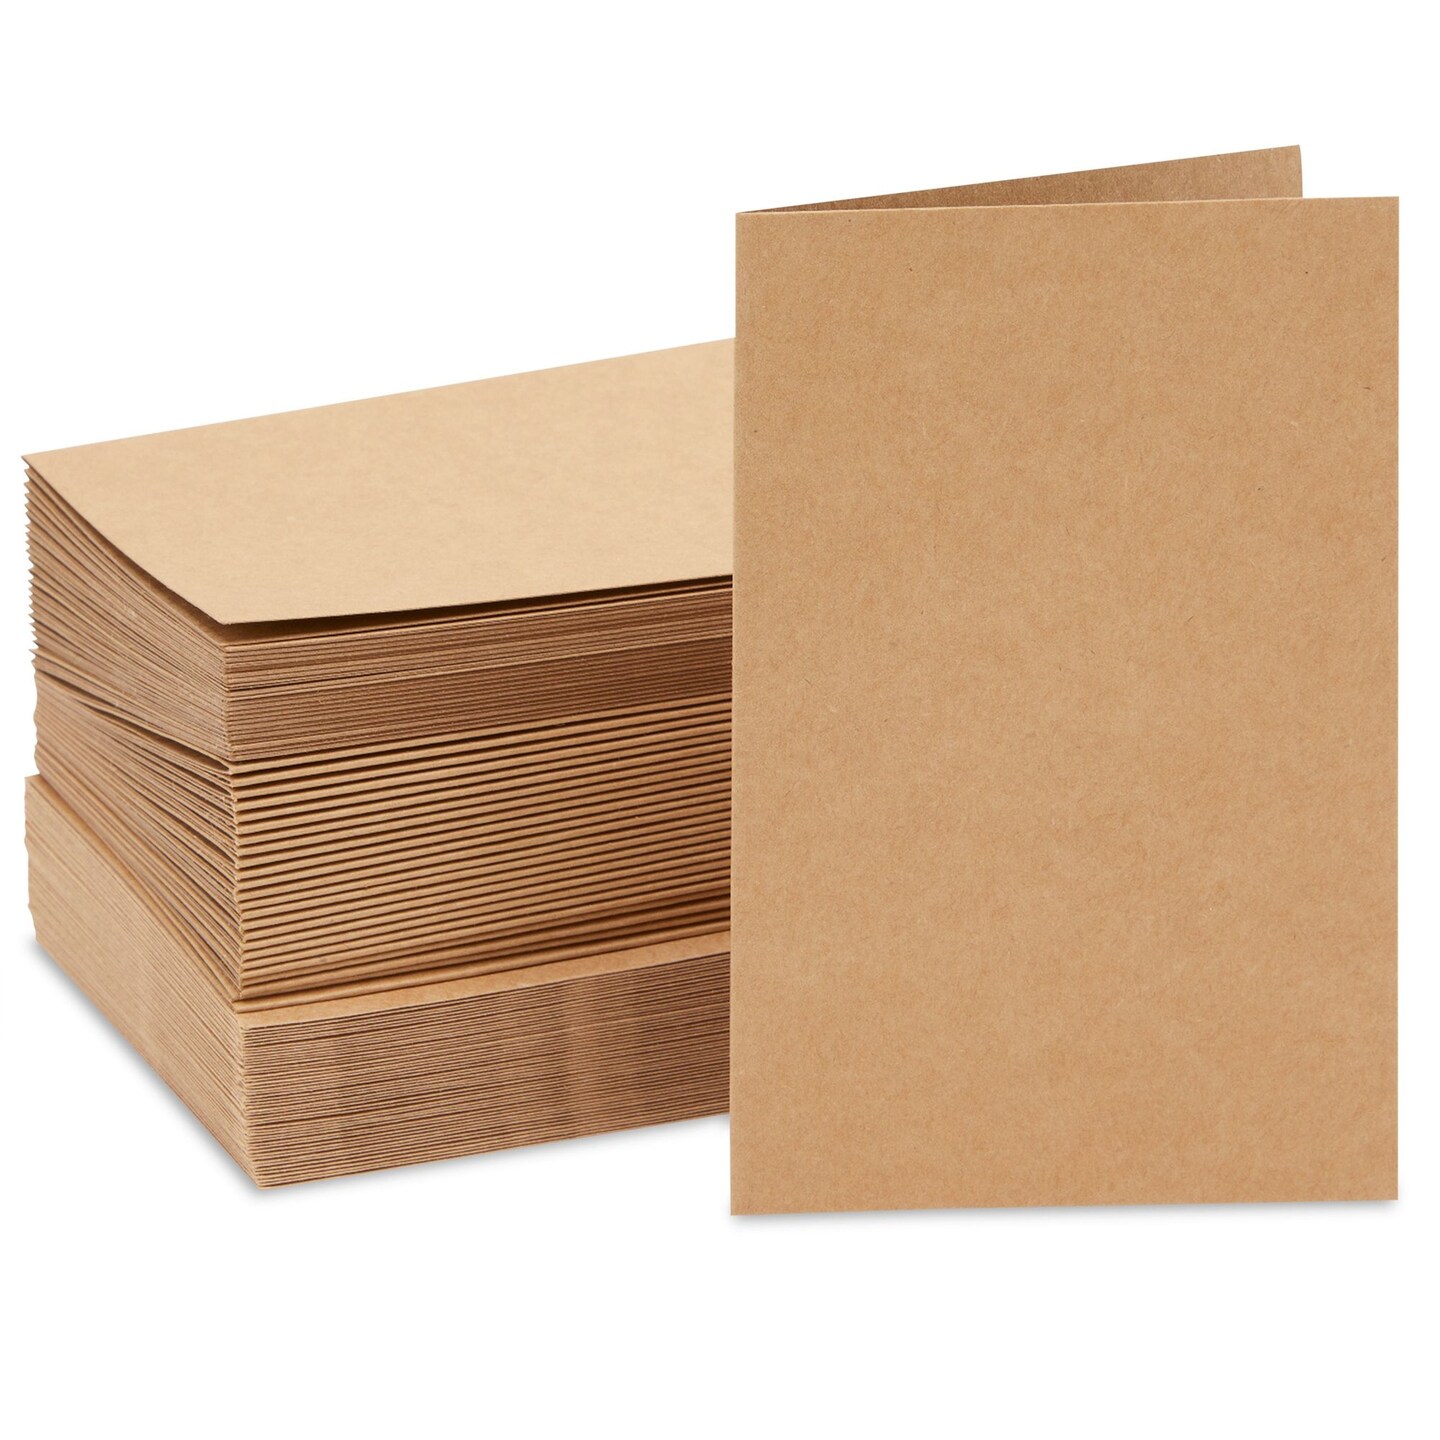 48 Pack Kraft Brown Blank Greeting Cards with Envelopes, Folded Cardstock  for DIY Wedding, Birthday Invitations, Crafts (4x6 In)